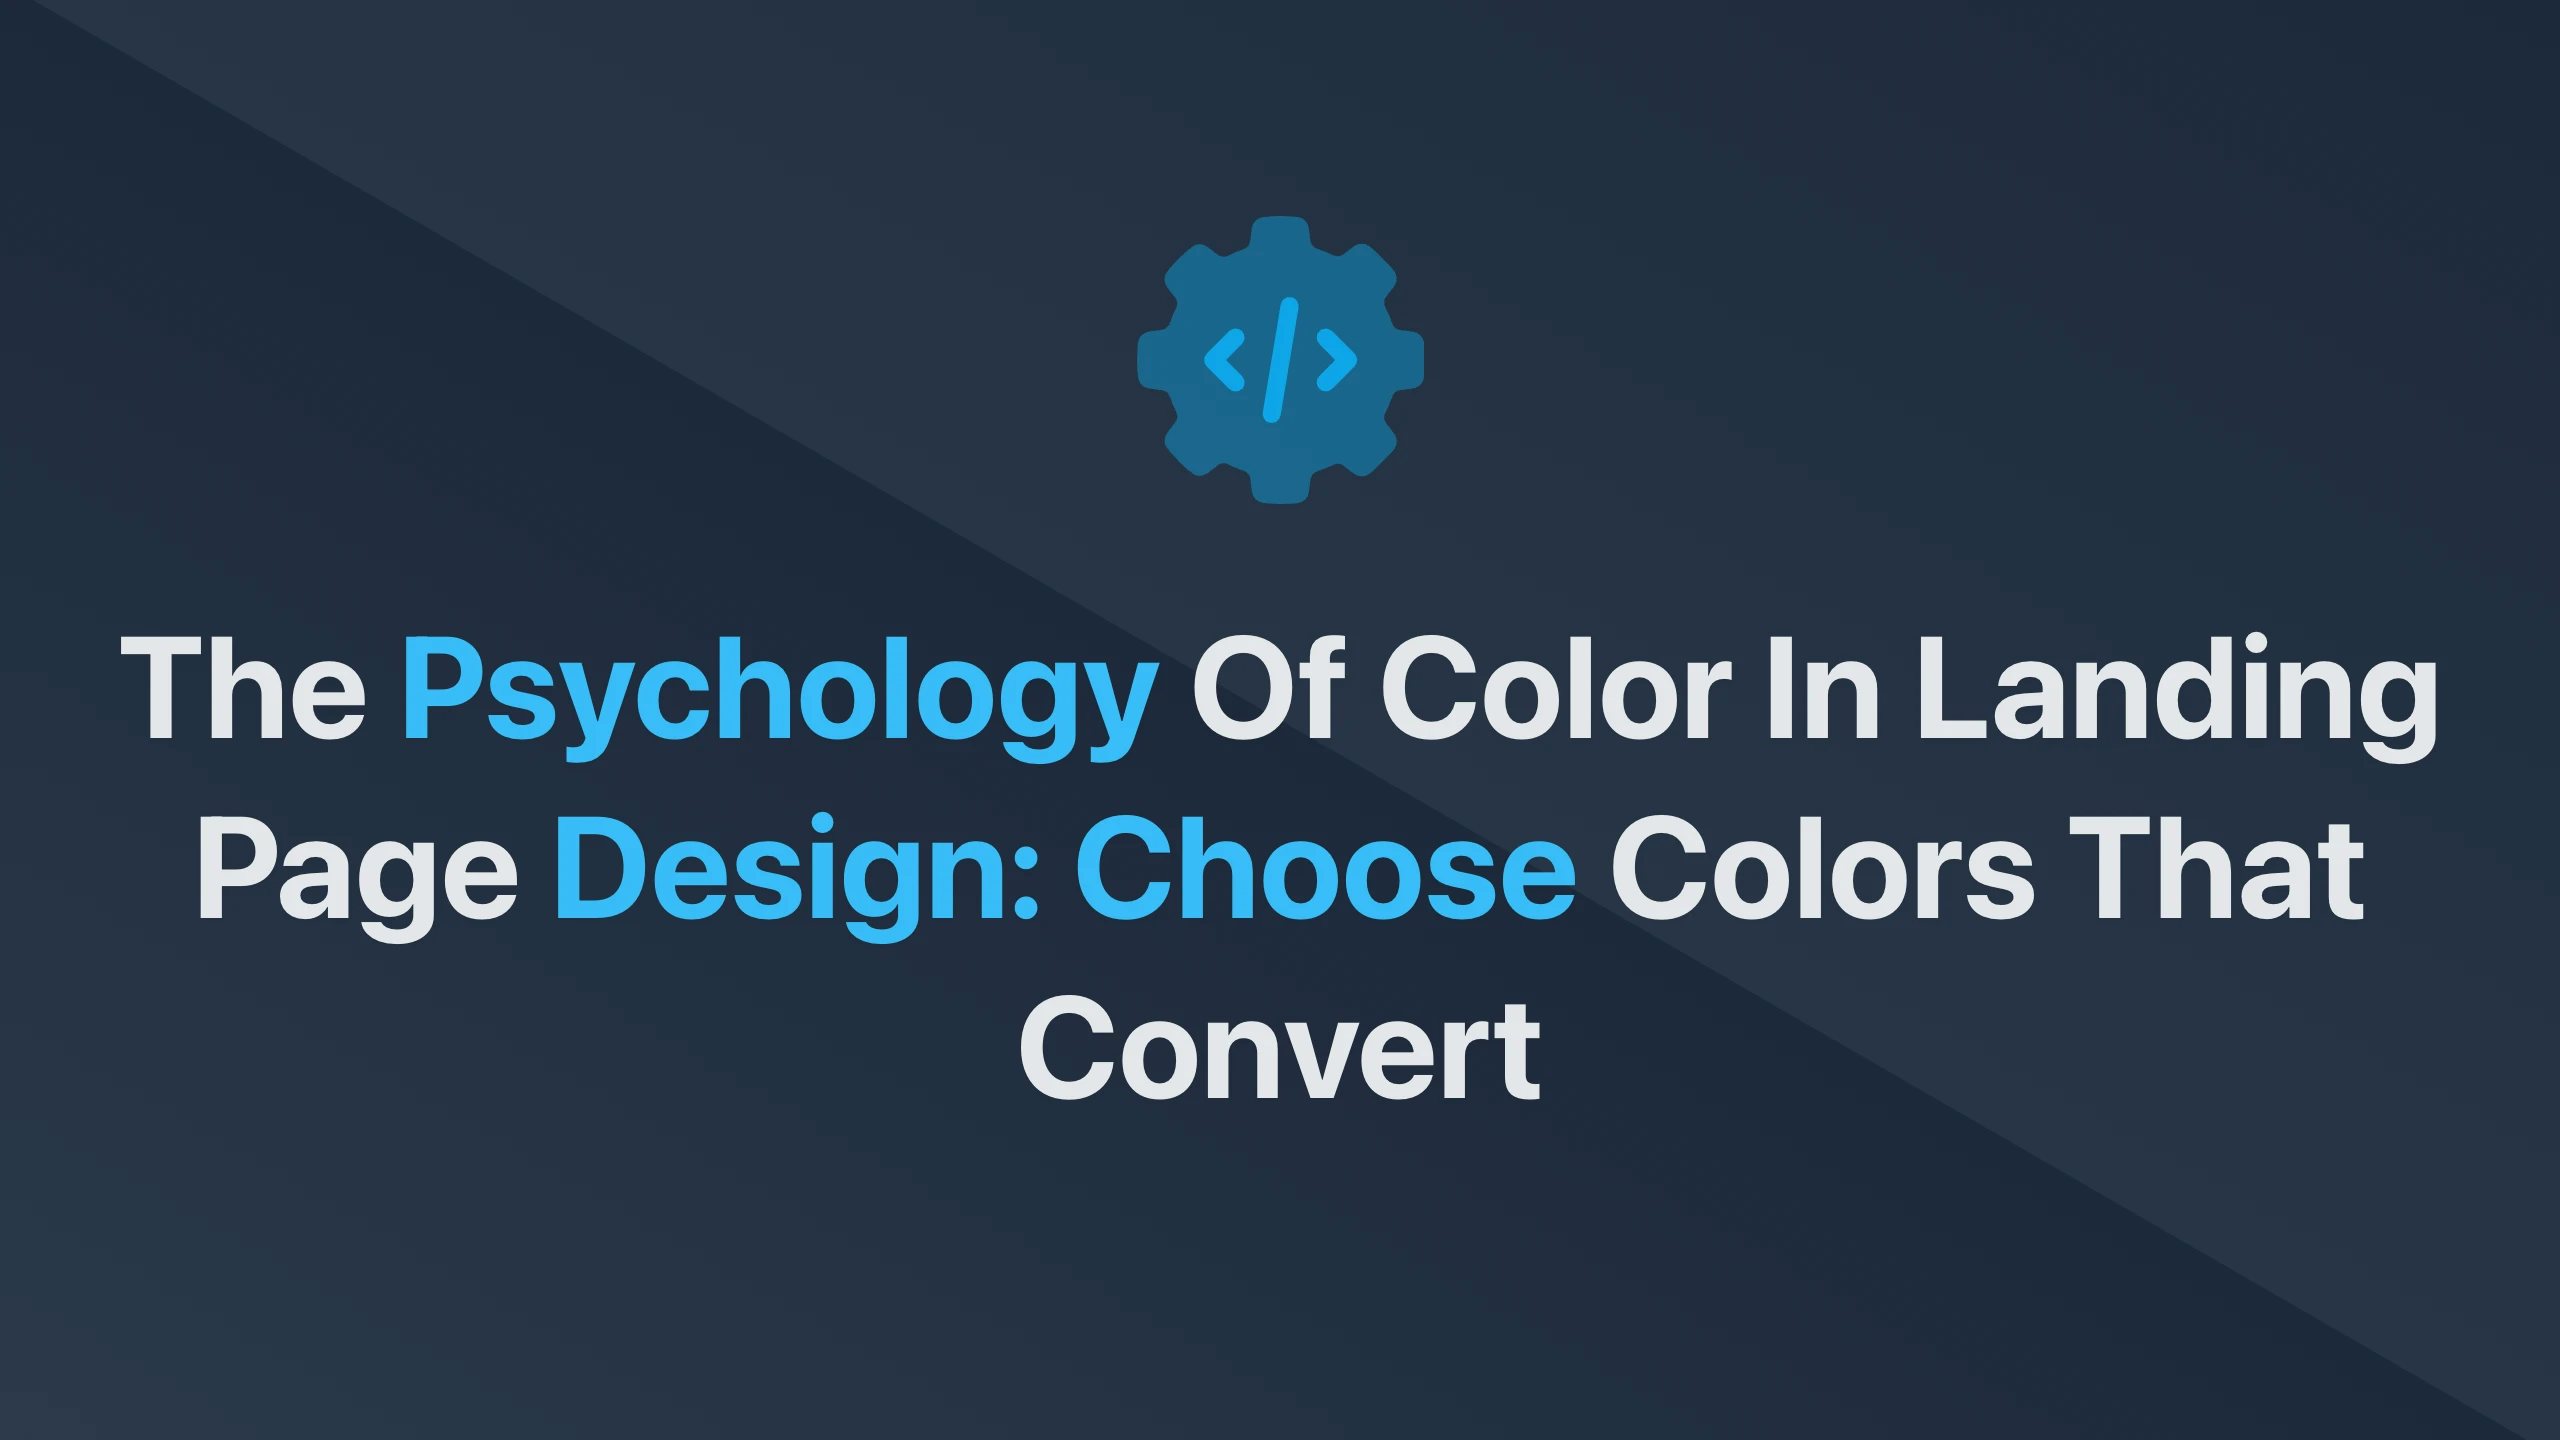 Cover Image for The Psychology of Color in Landing Page Design: Choose Colors that Convert